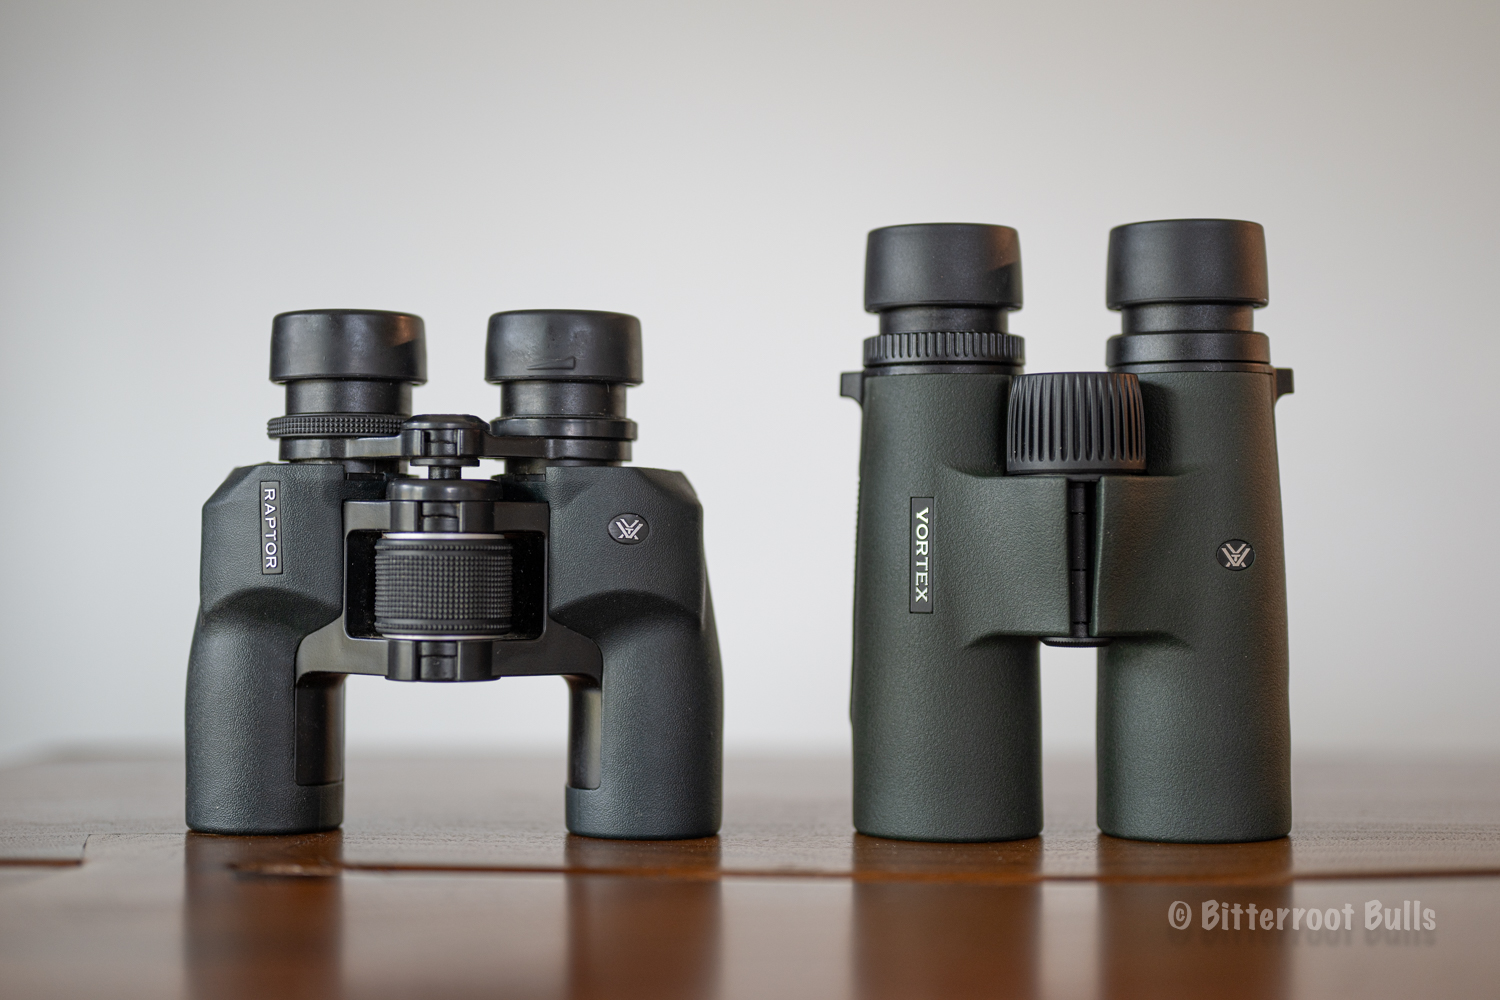 Vortex now offers a roof prism binocular in the price range of their budget porro-prism Raptor line.